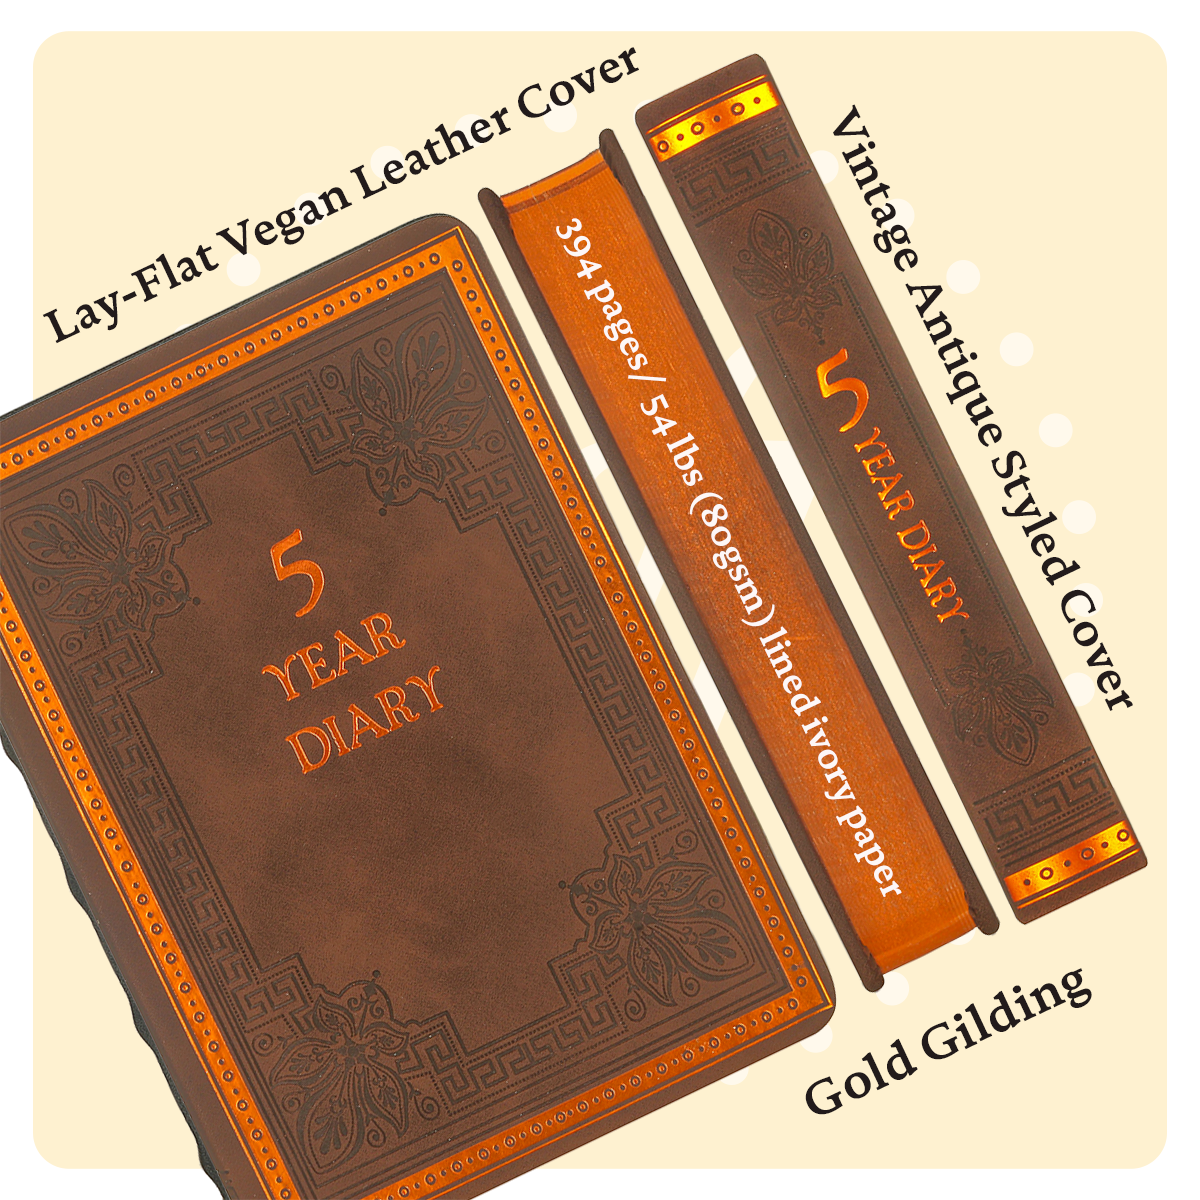 Five-Year Vintage Look Diary (Motivational, Prayer, Gratitude, Mindfulness, Self-Help and Daily Affirmations) 4.64x6.6", 394p. (Brown)